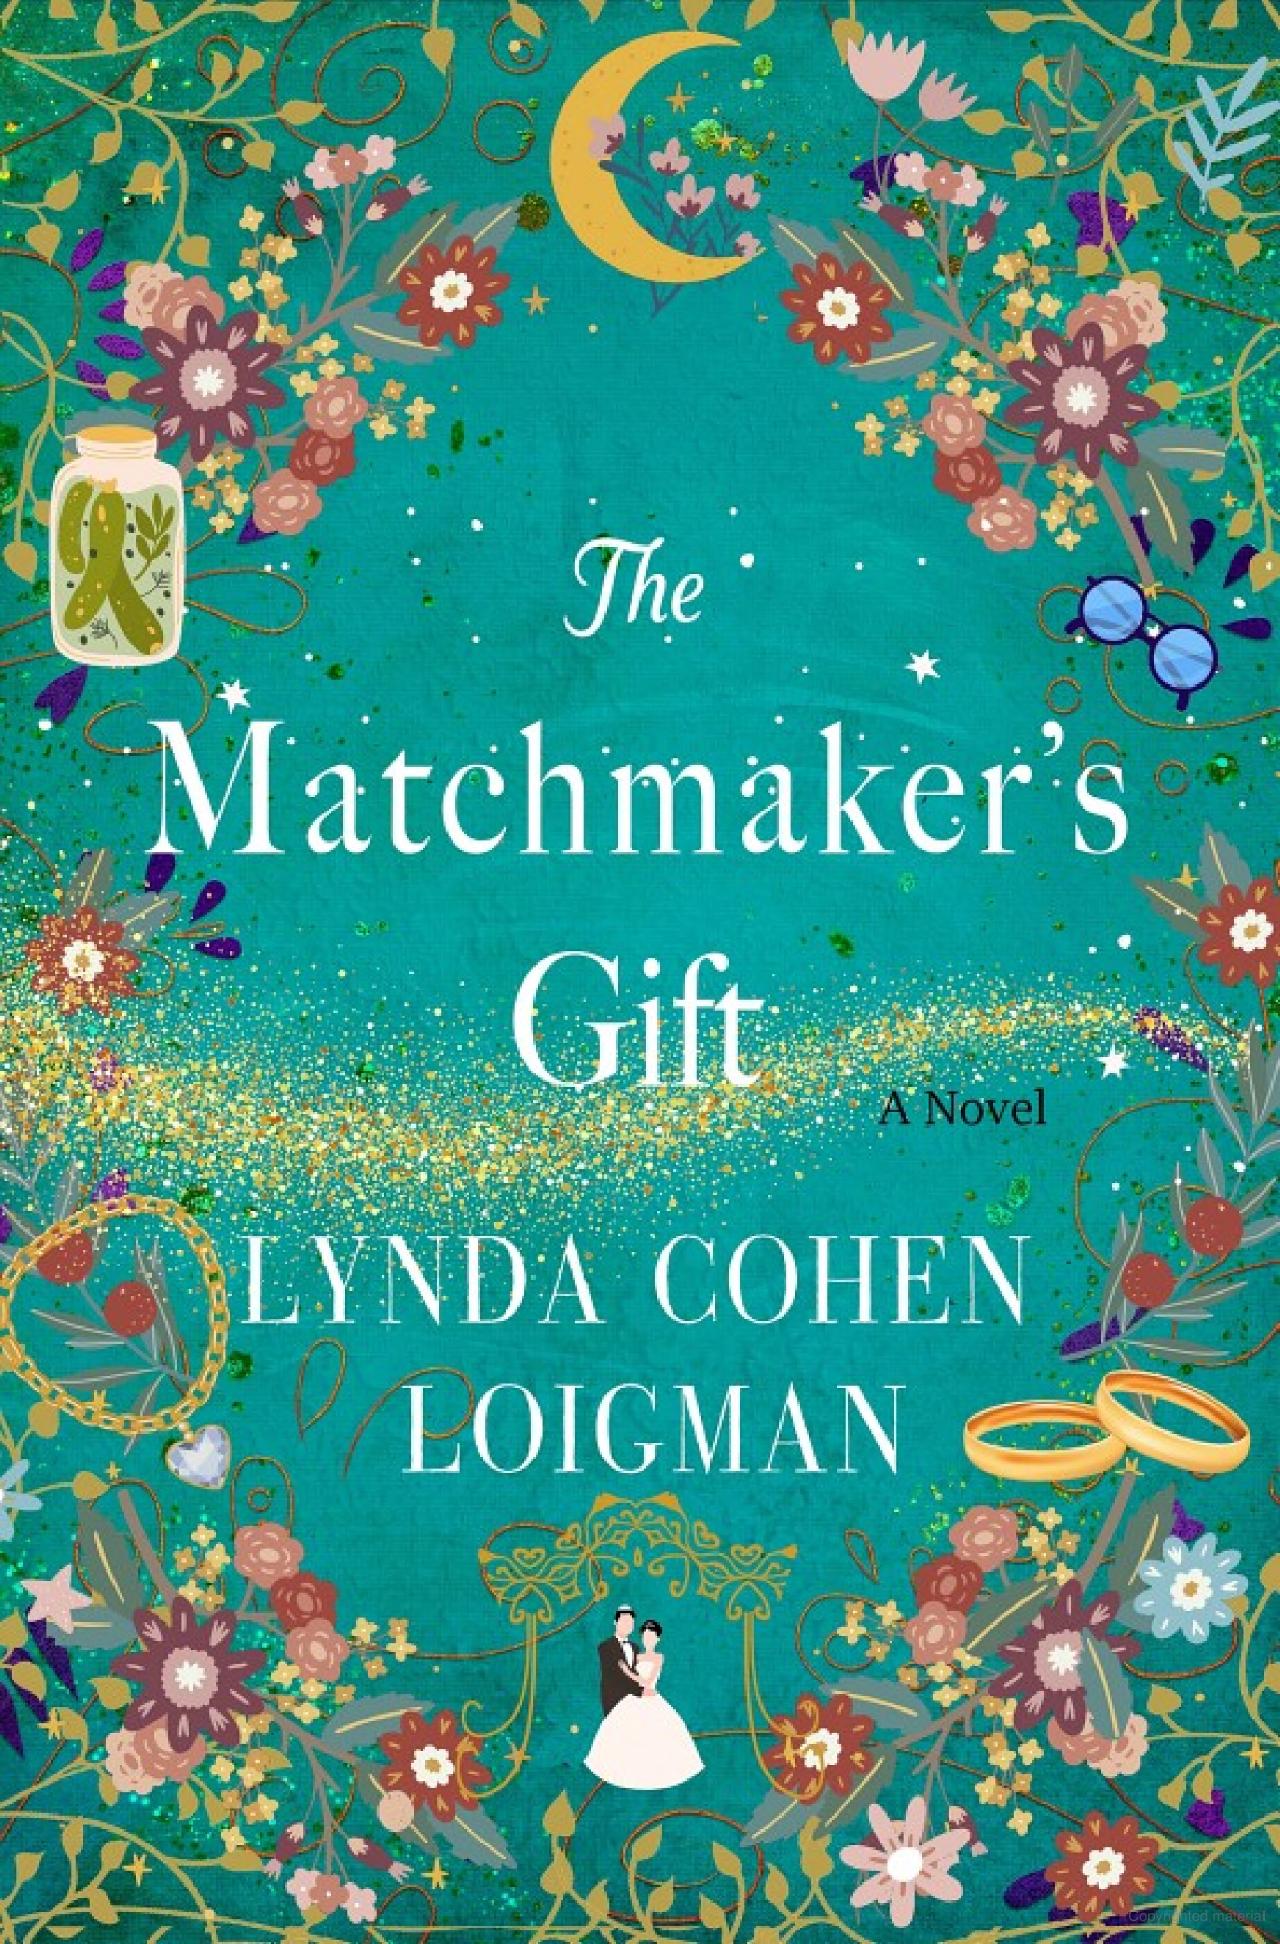 Image of the book cover Book Title: Matchmaker's Gift by Lynda Cohen Loigman featuring wild flowers and a small silhouette of a bride and groom